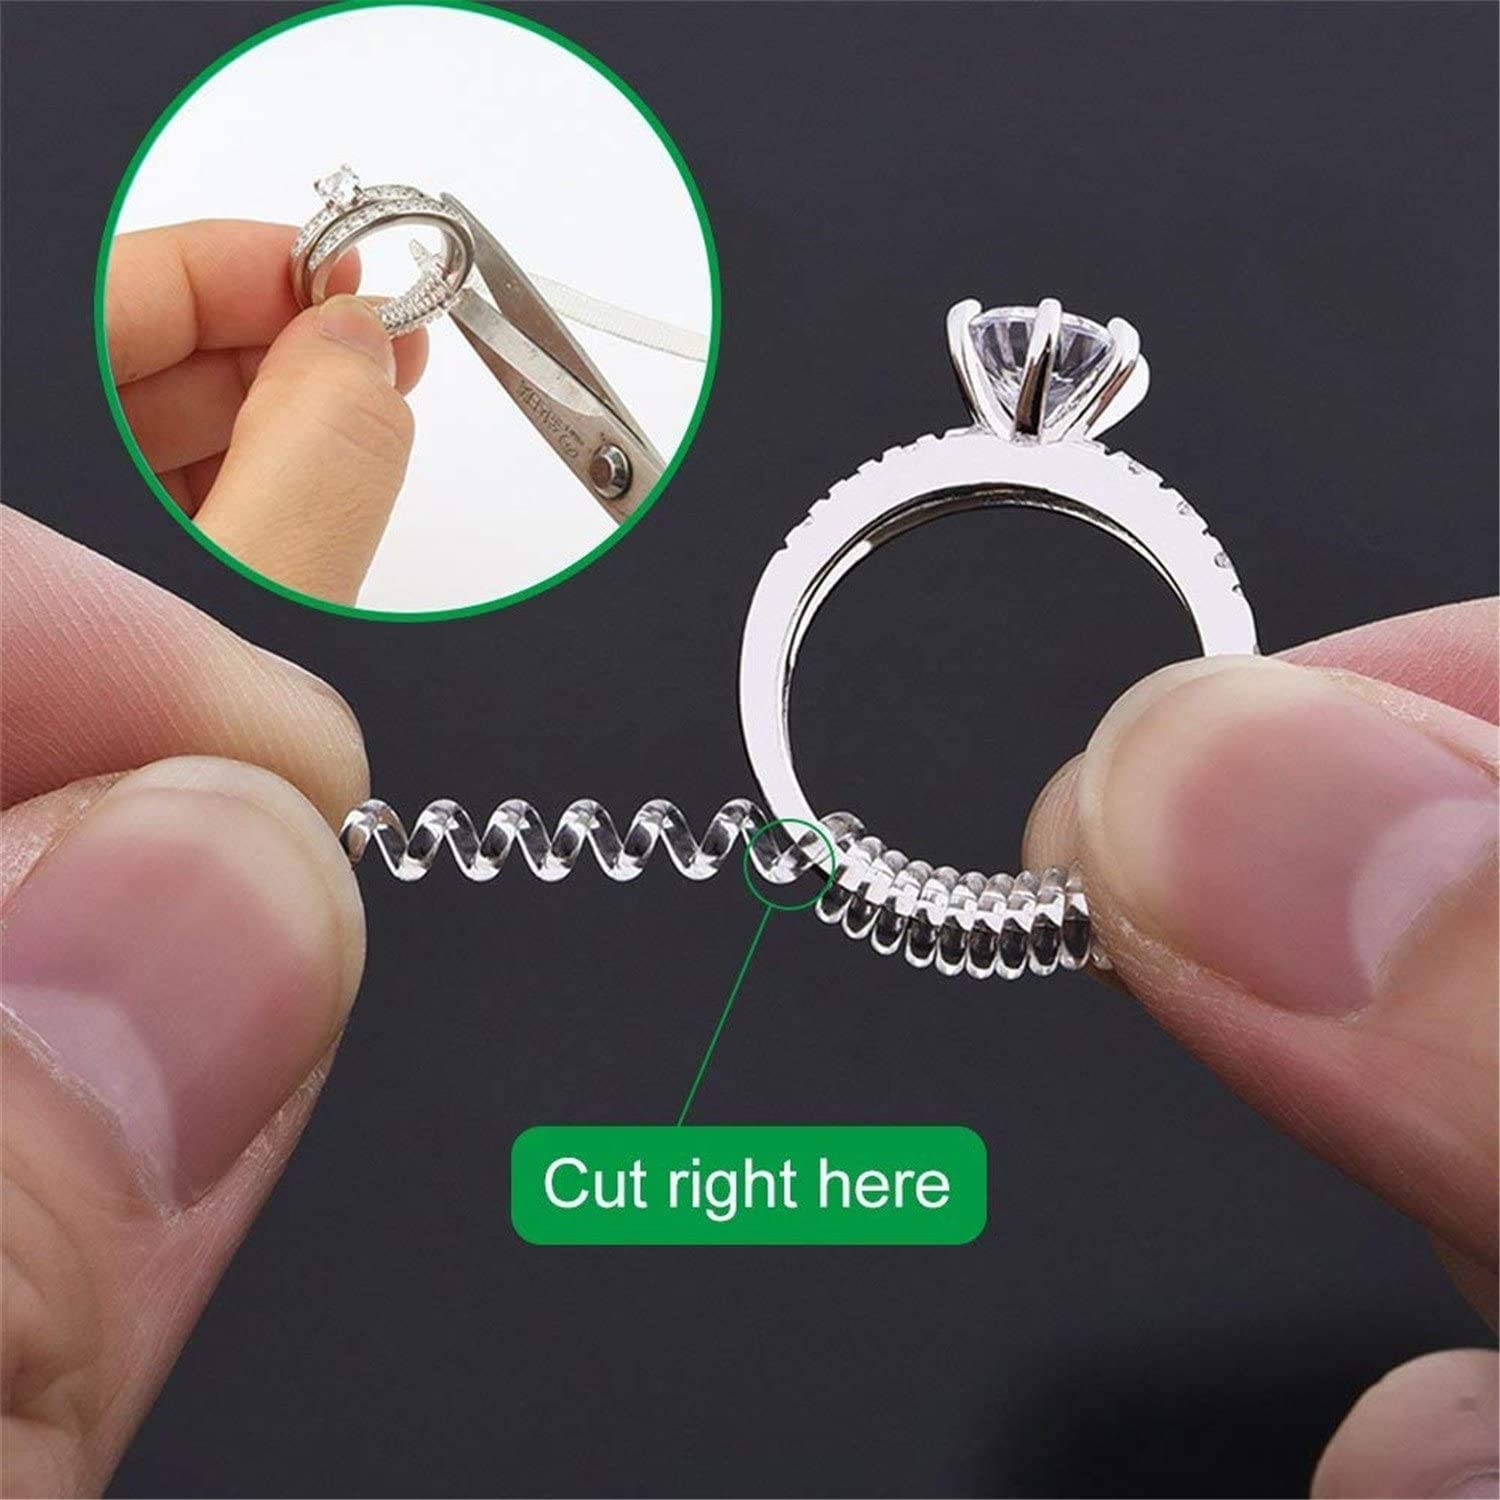 Men's and Women's Ring Adjuster for Loose Rings, Invisible Spiral Ring, Reusable Ring Size Adjuster - Fits Almost Any Rings (4 models)